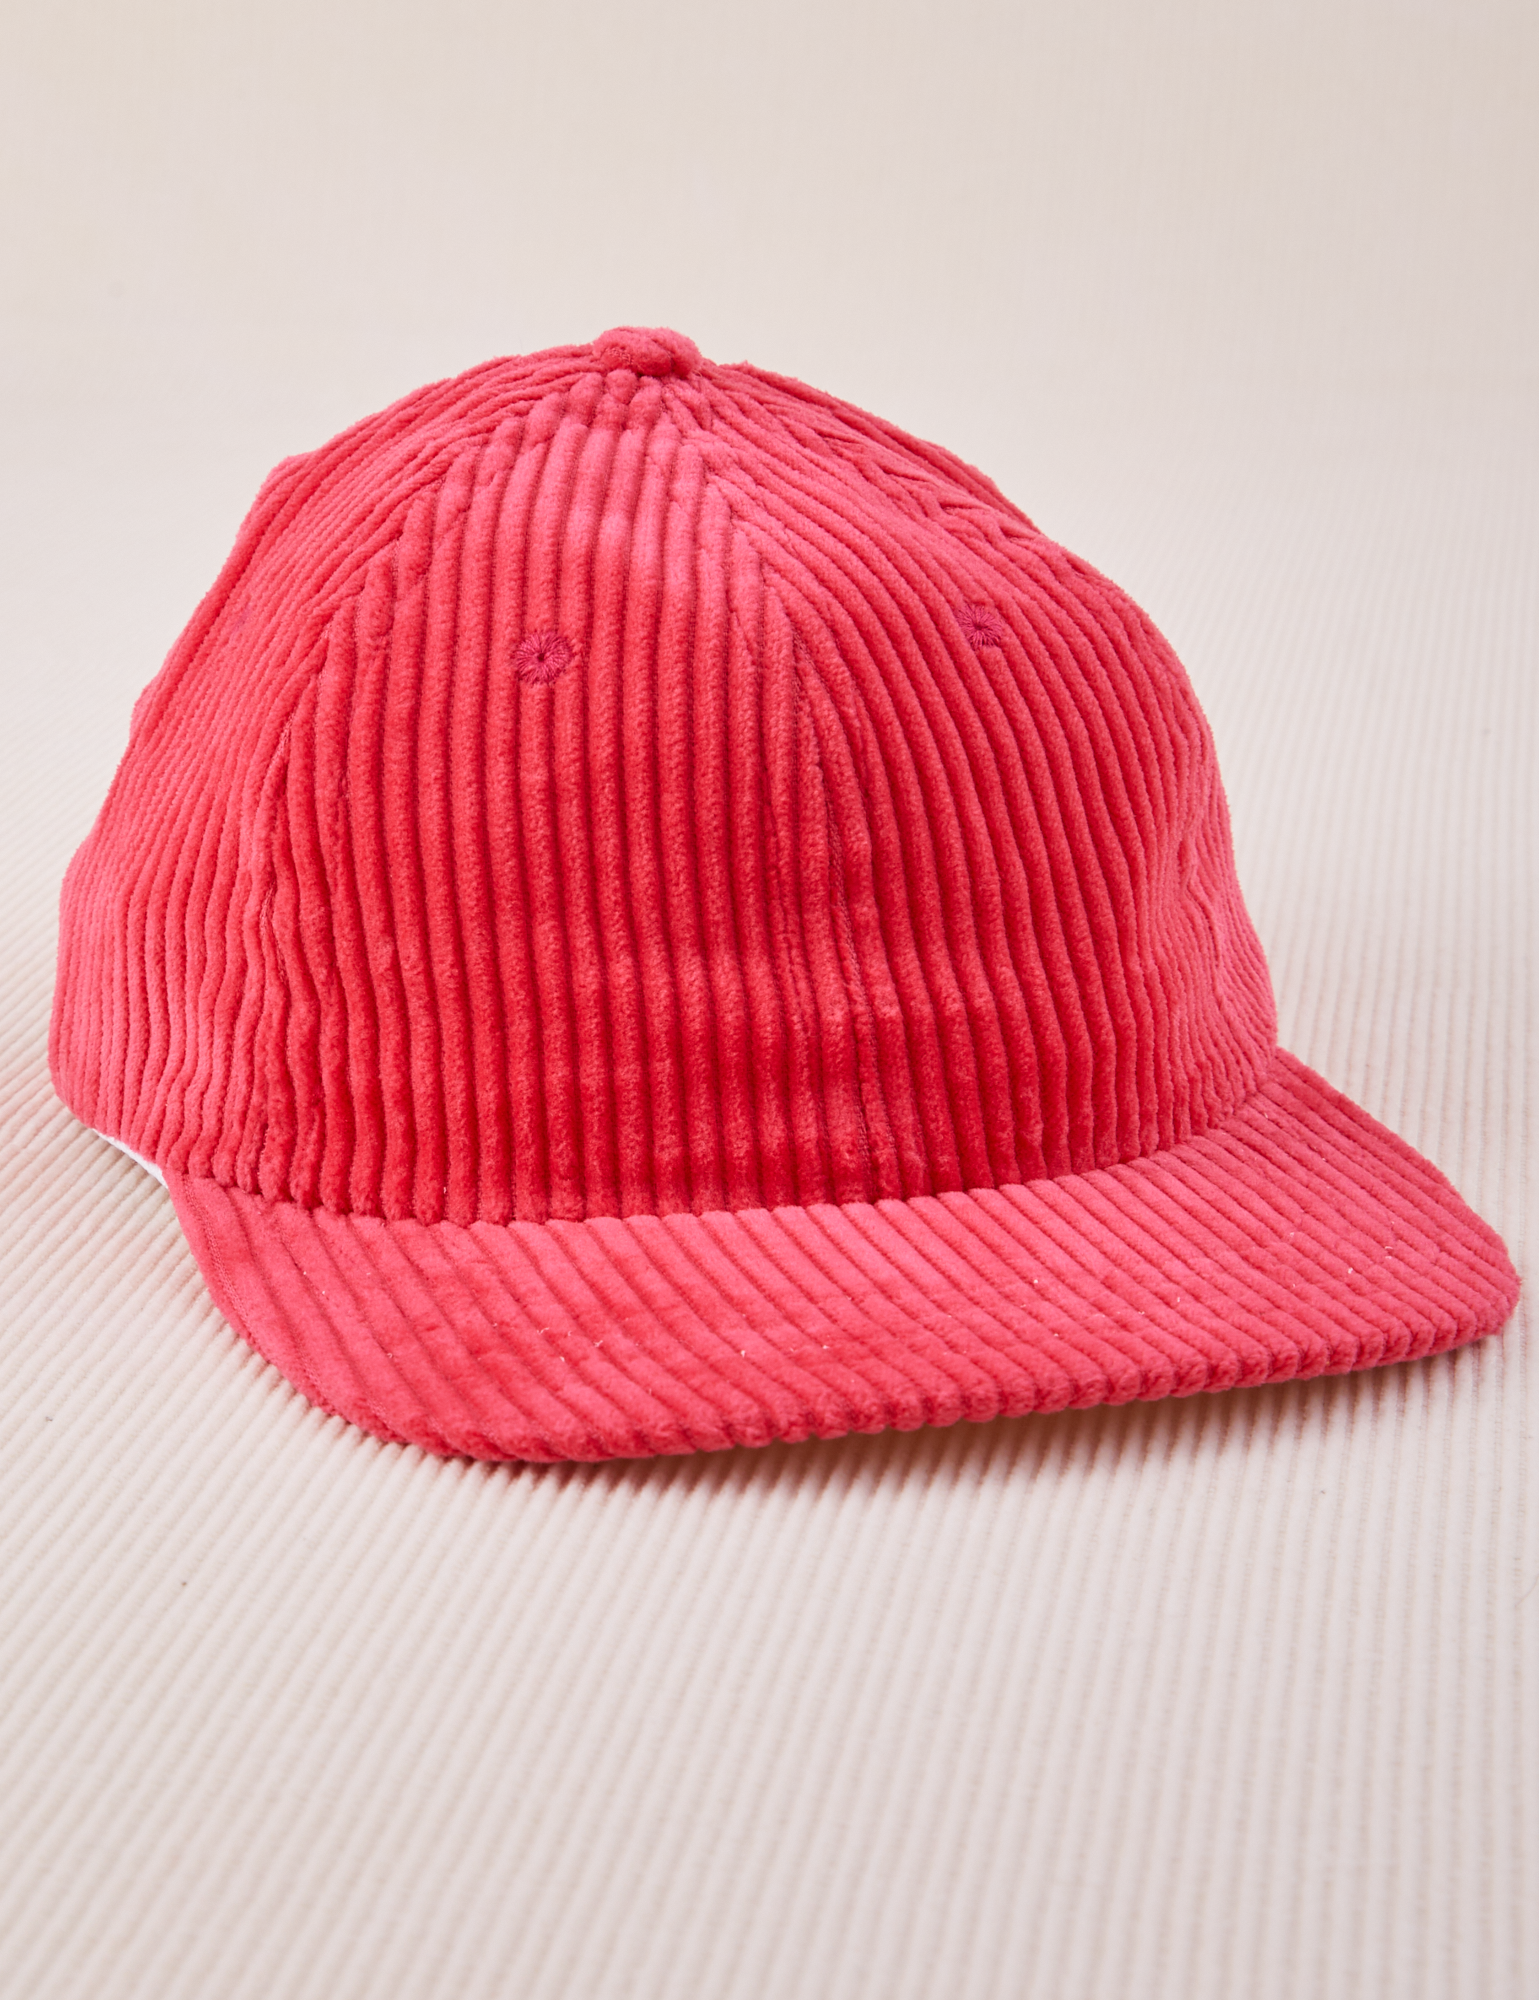 Dugout Corduroy Hat in Hot Pink